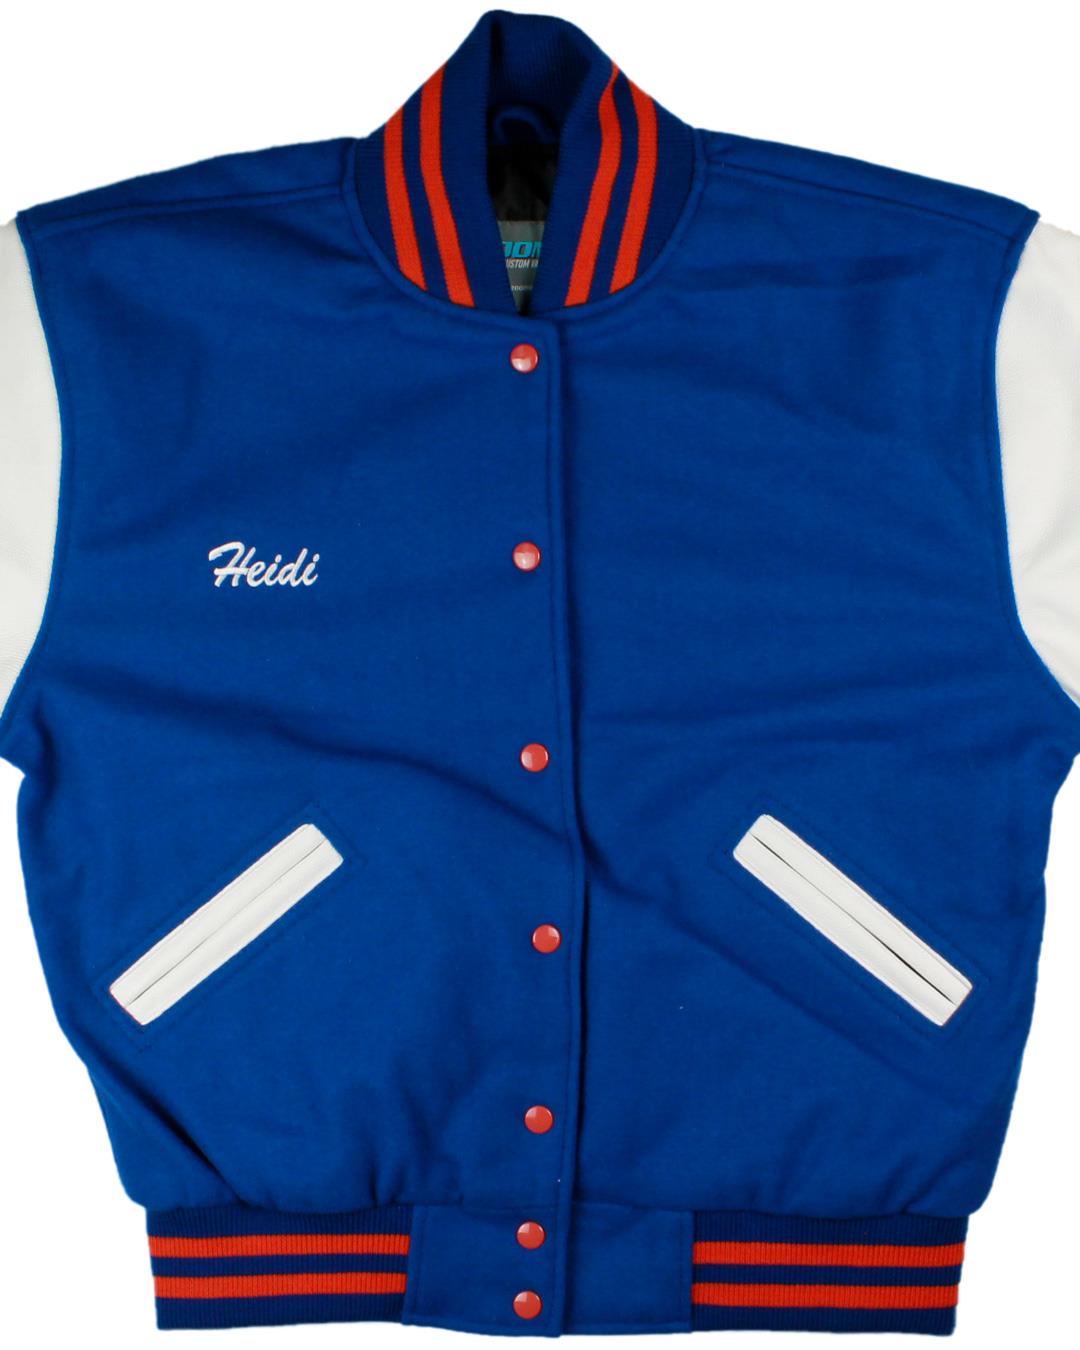 Bartow High School Letter Jacket, Bartow, FL  - Front